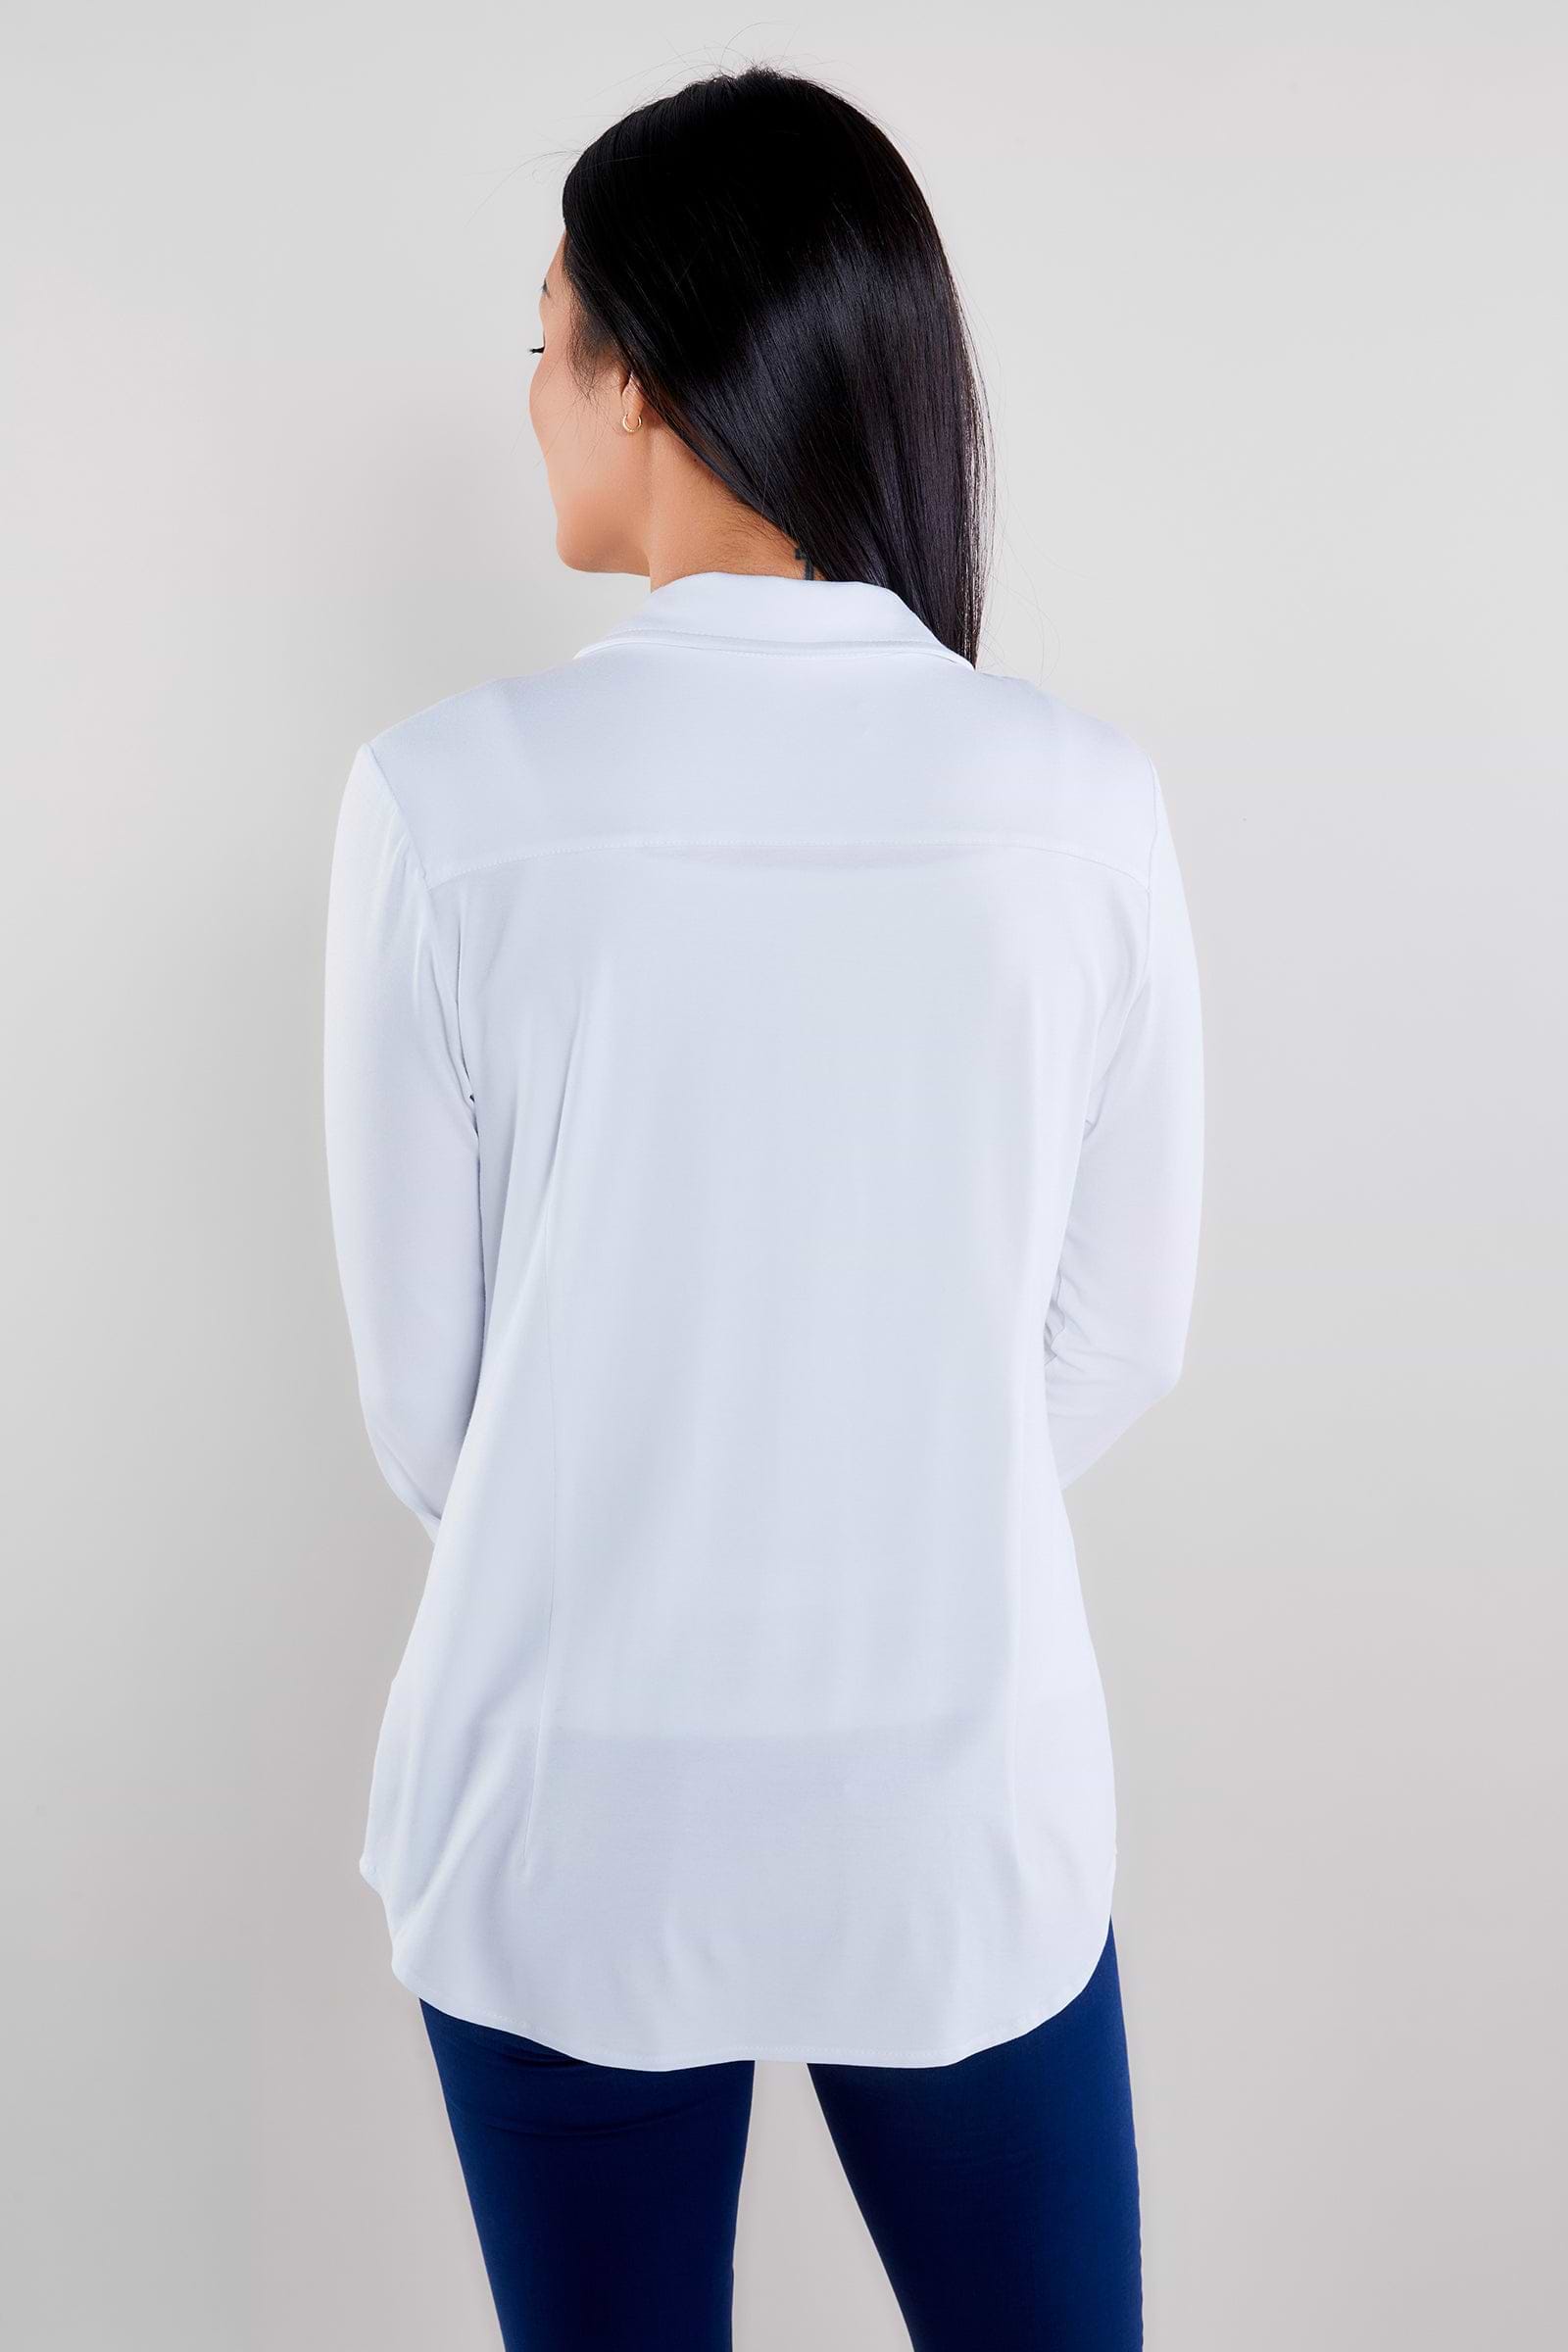 The Best Travel Shirt. Woman Showing the Back Profile of a Nikki Longsleeve Jersey Shirt in White